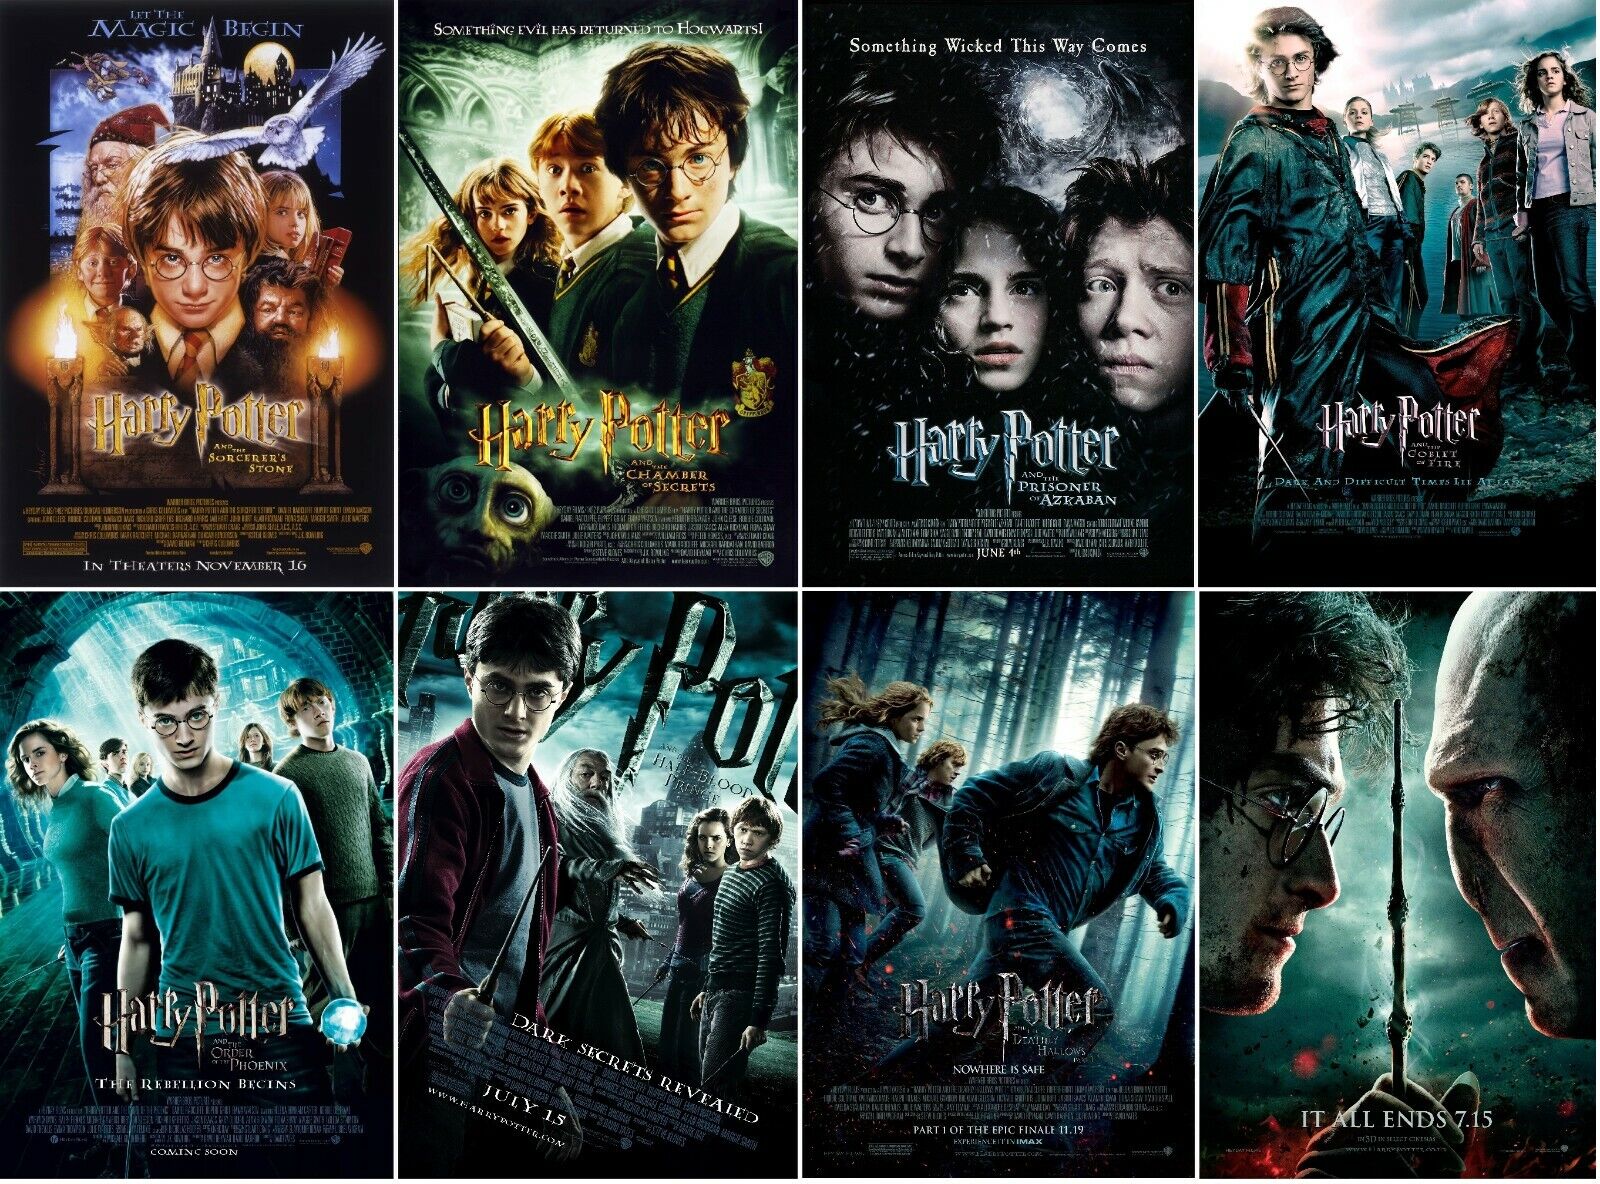 What is the running time of each Harry Potter movie? 2